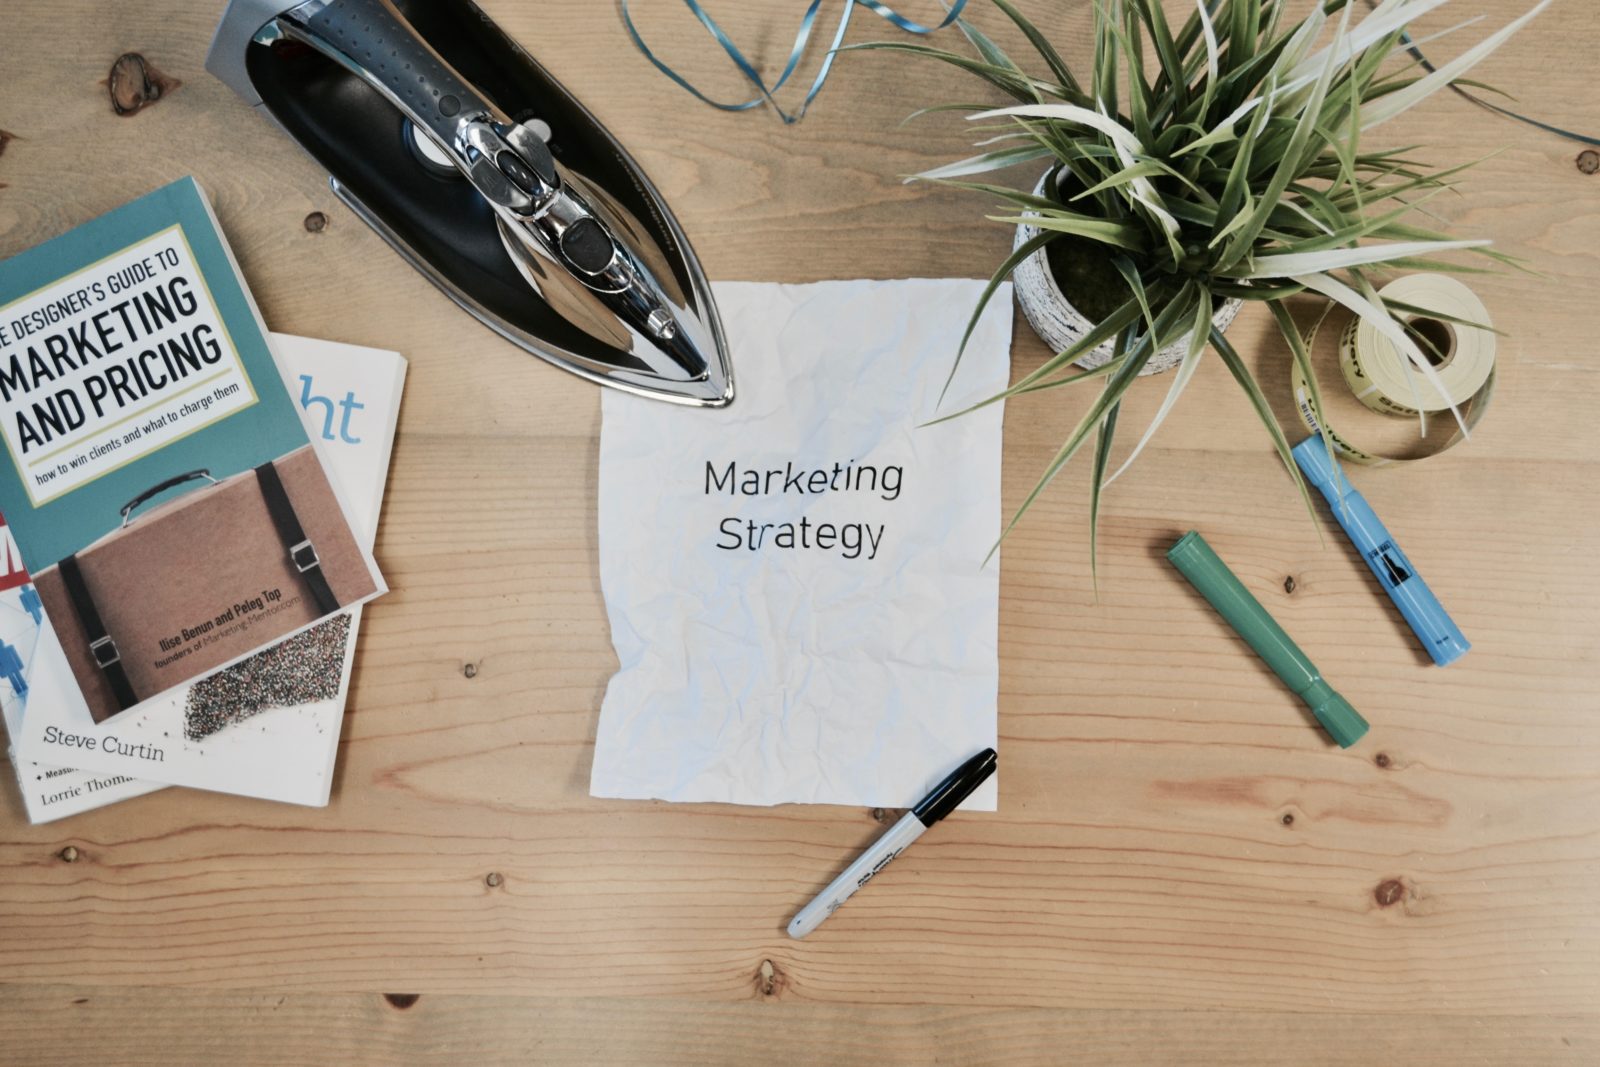 Desk with a paper that says Marketing Strategy on it